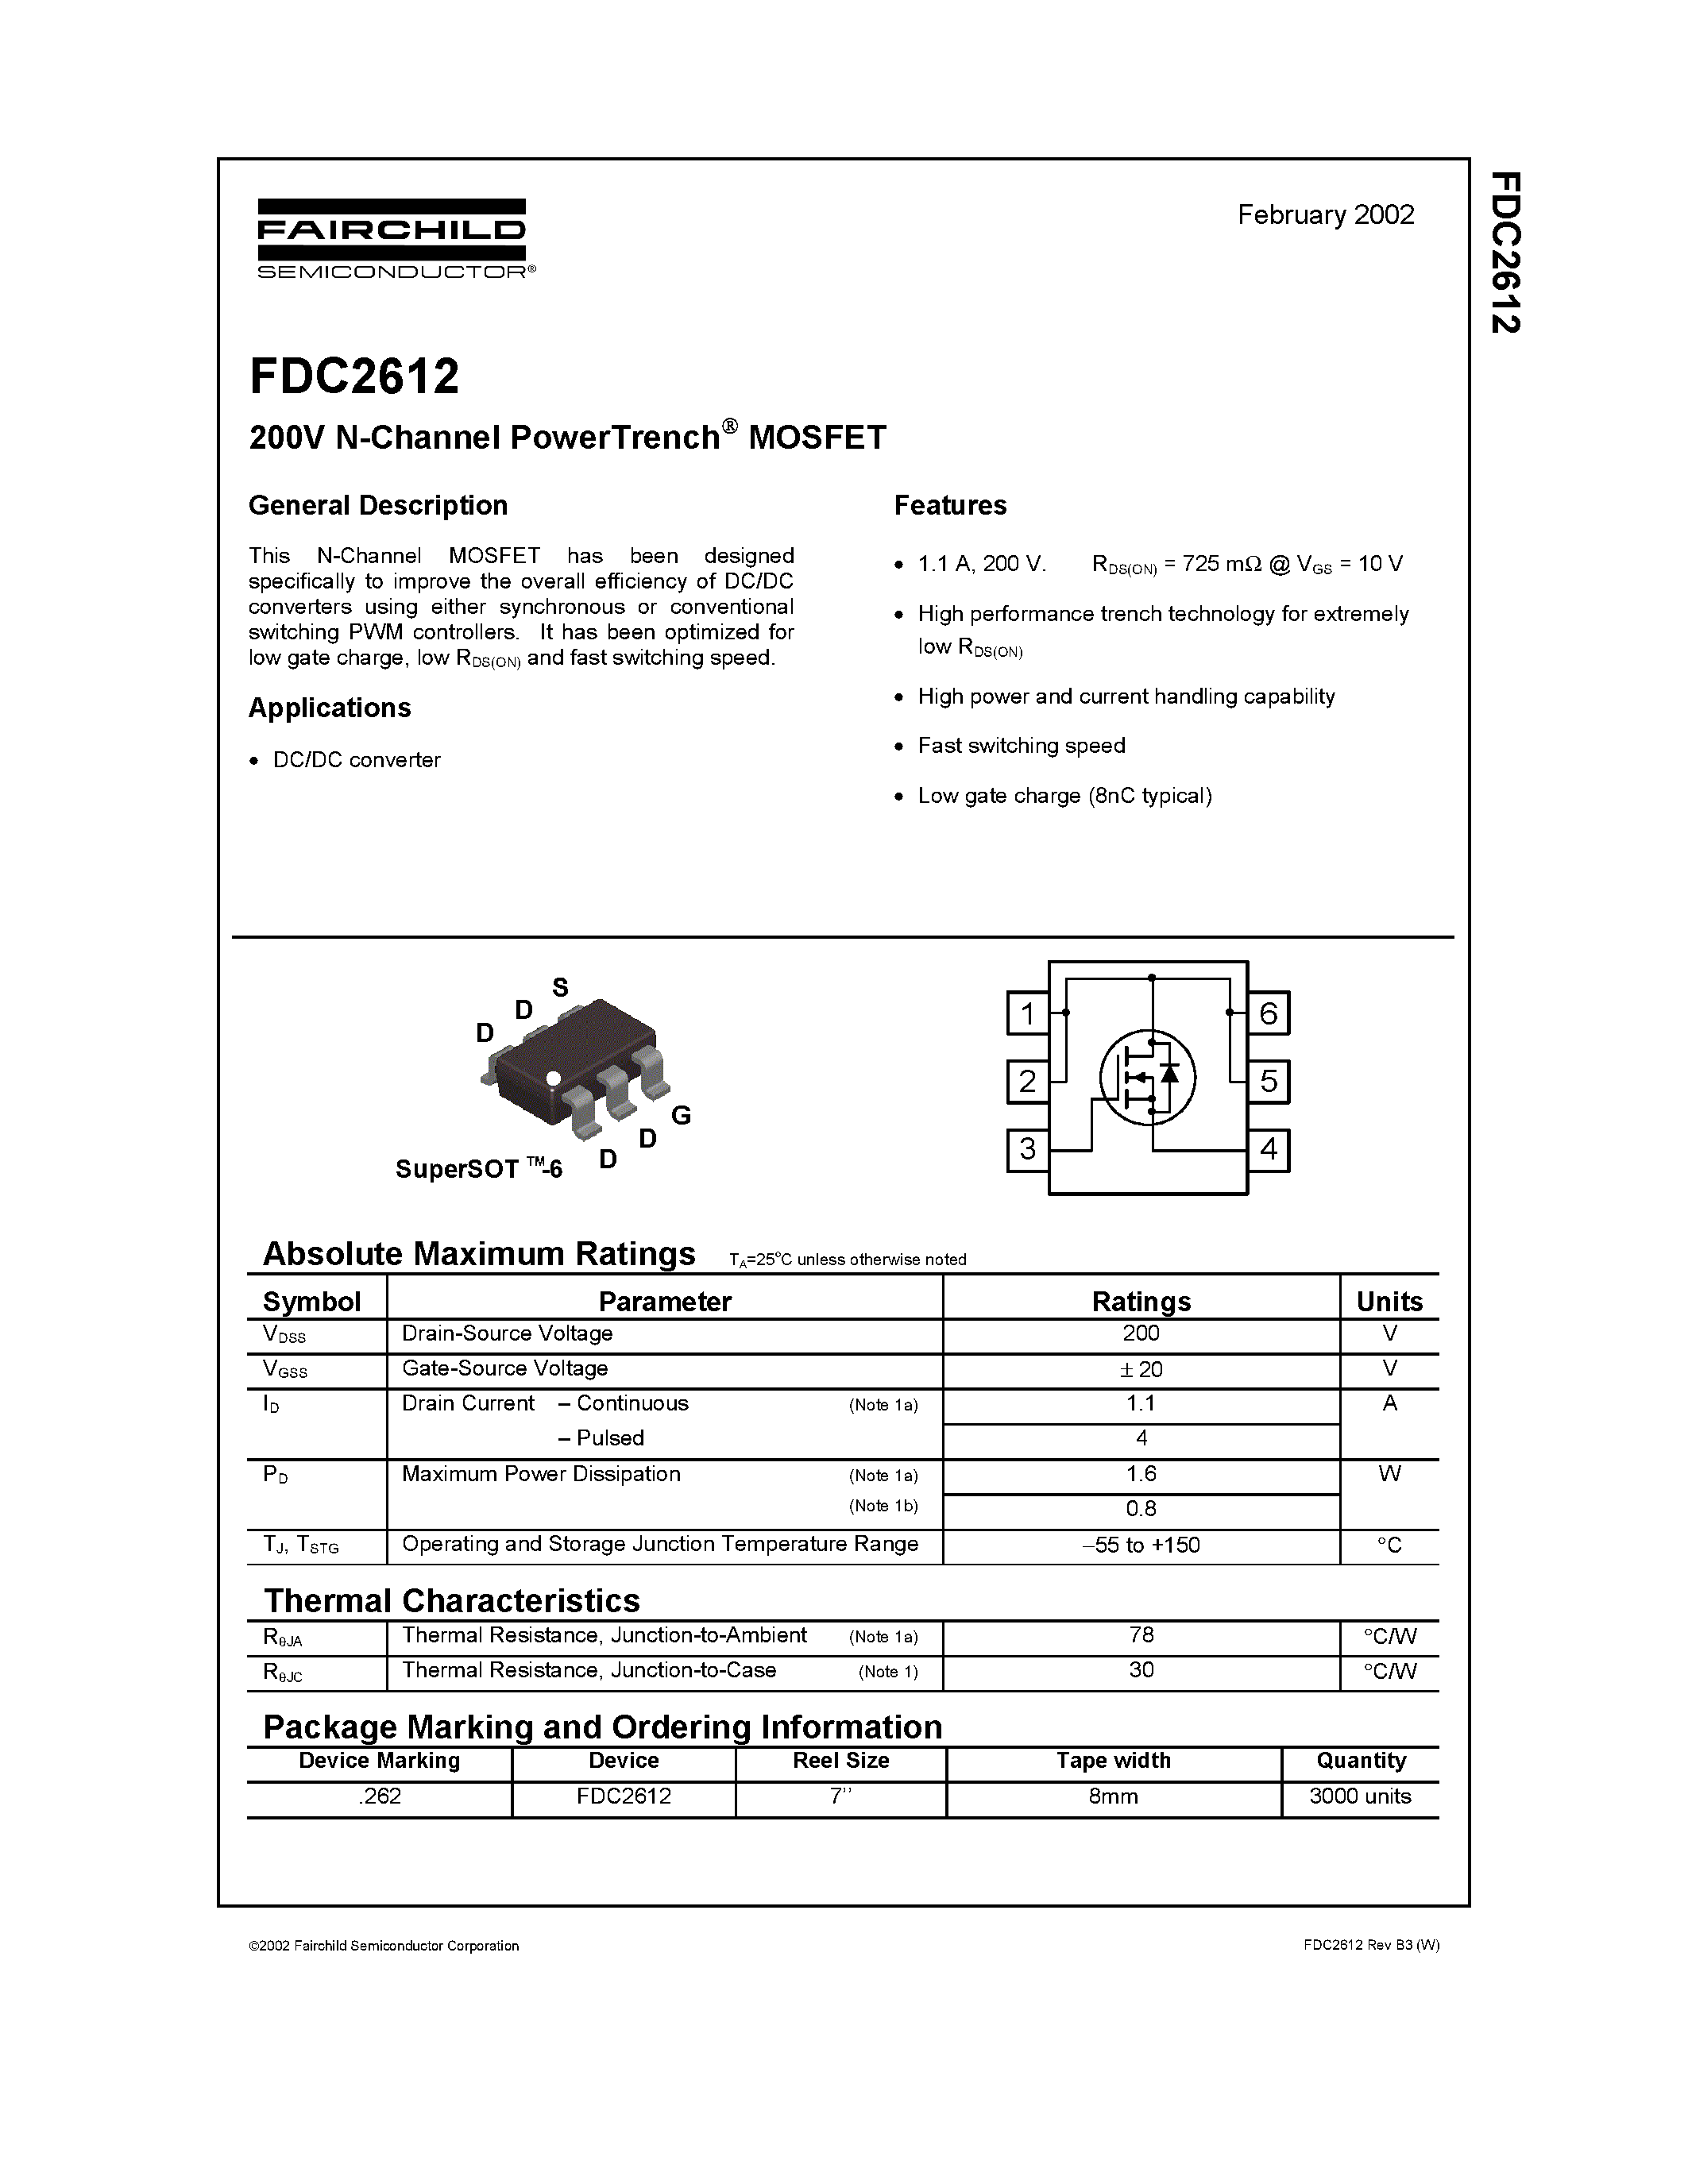 Даташит FDC2612 - 200V N-Channel PowerTrench MOSFET страница 1